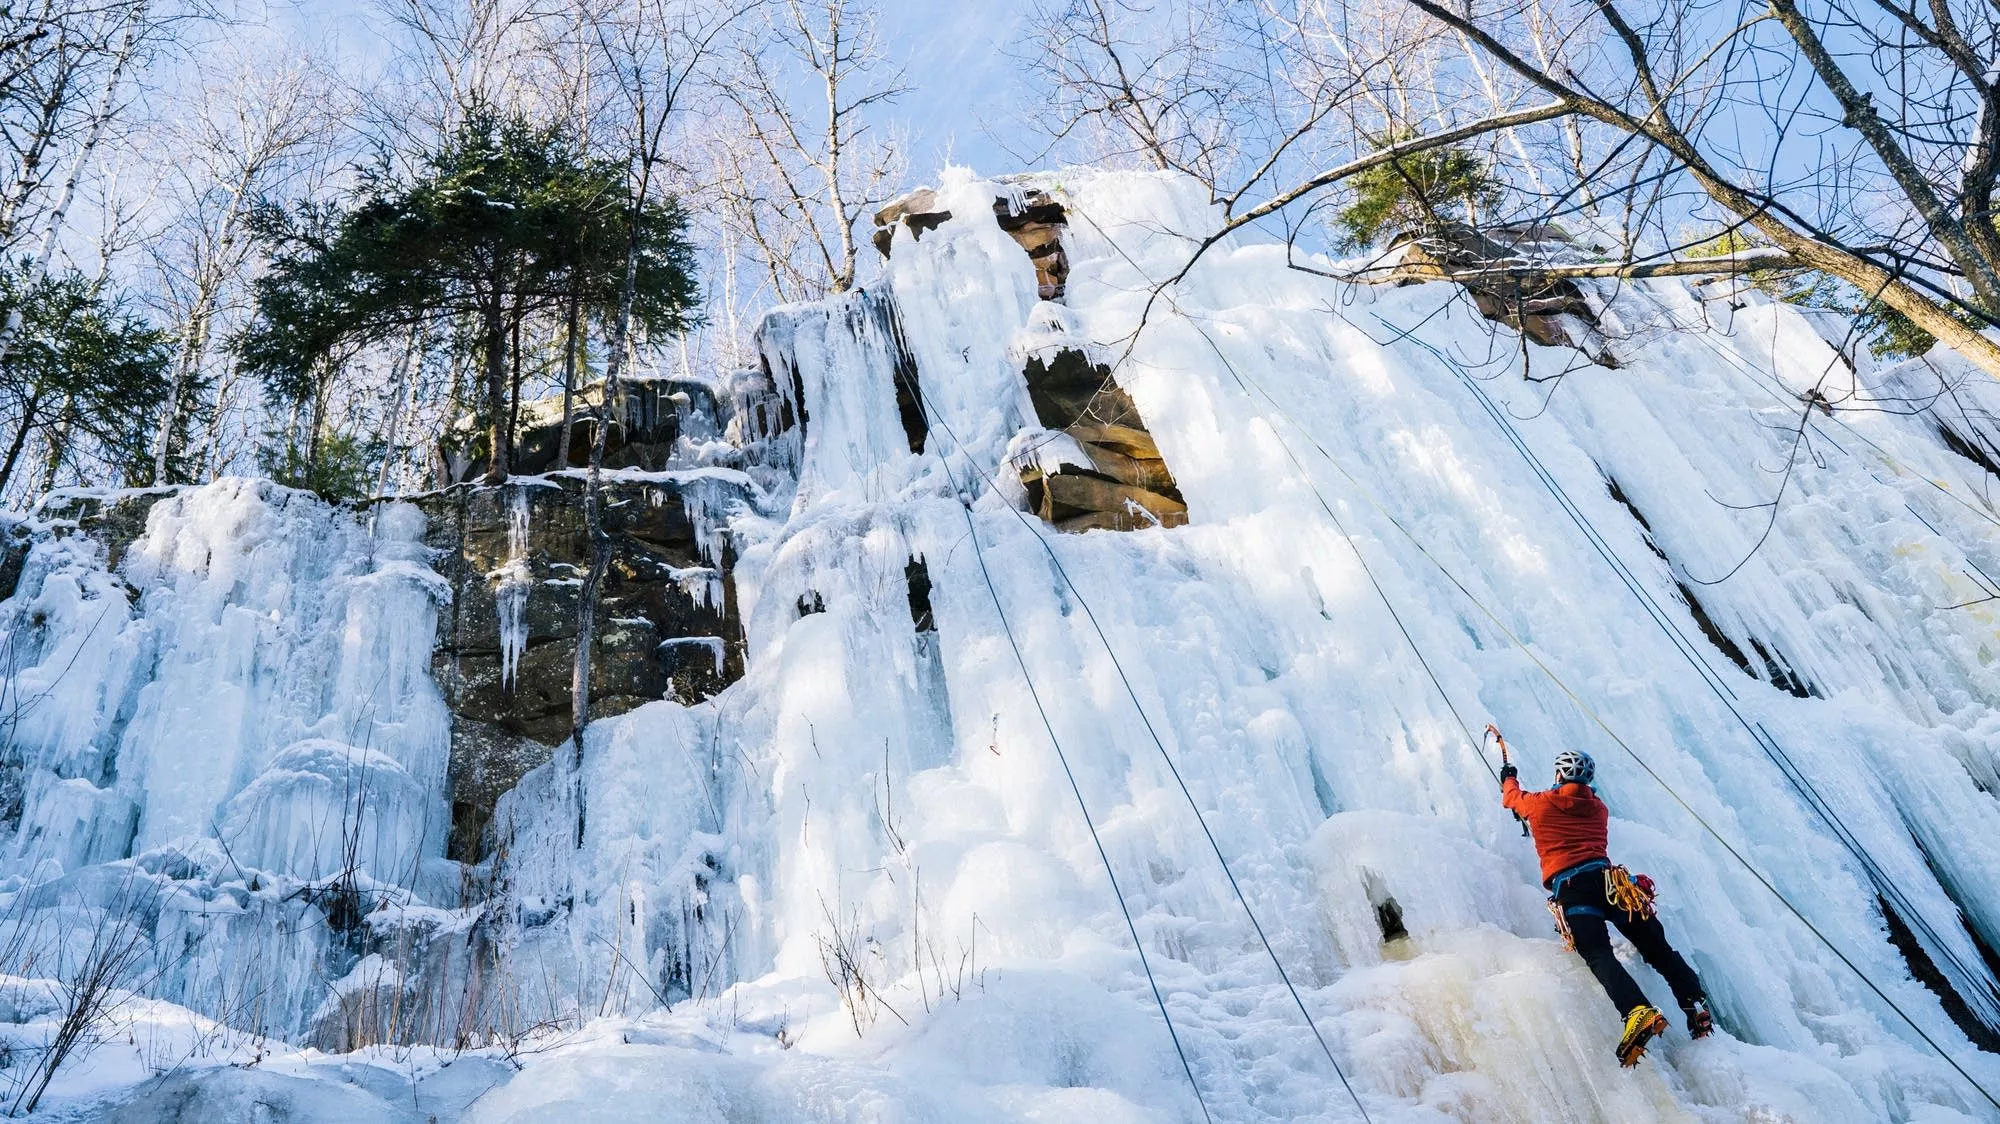 Sandstone Ice Park in USA, North America | Ice Climbing - Rated 4.1